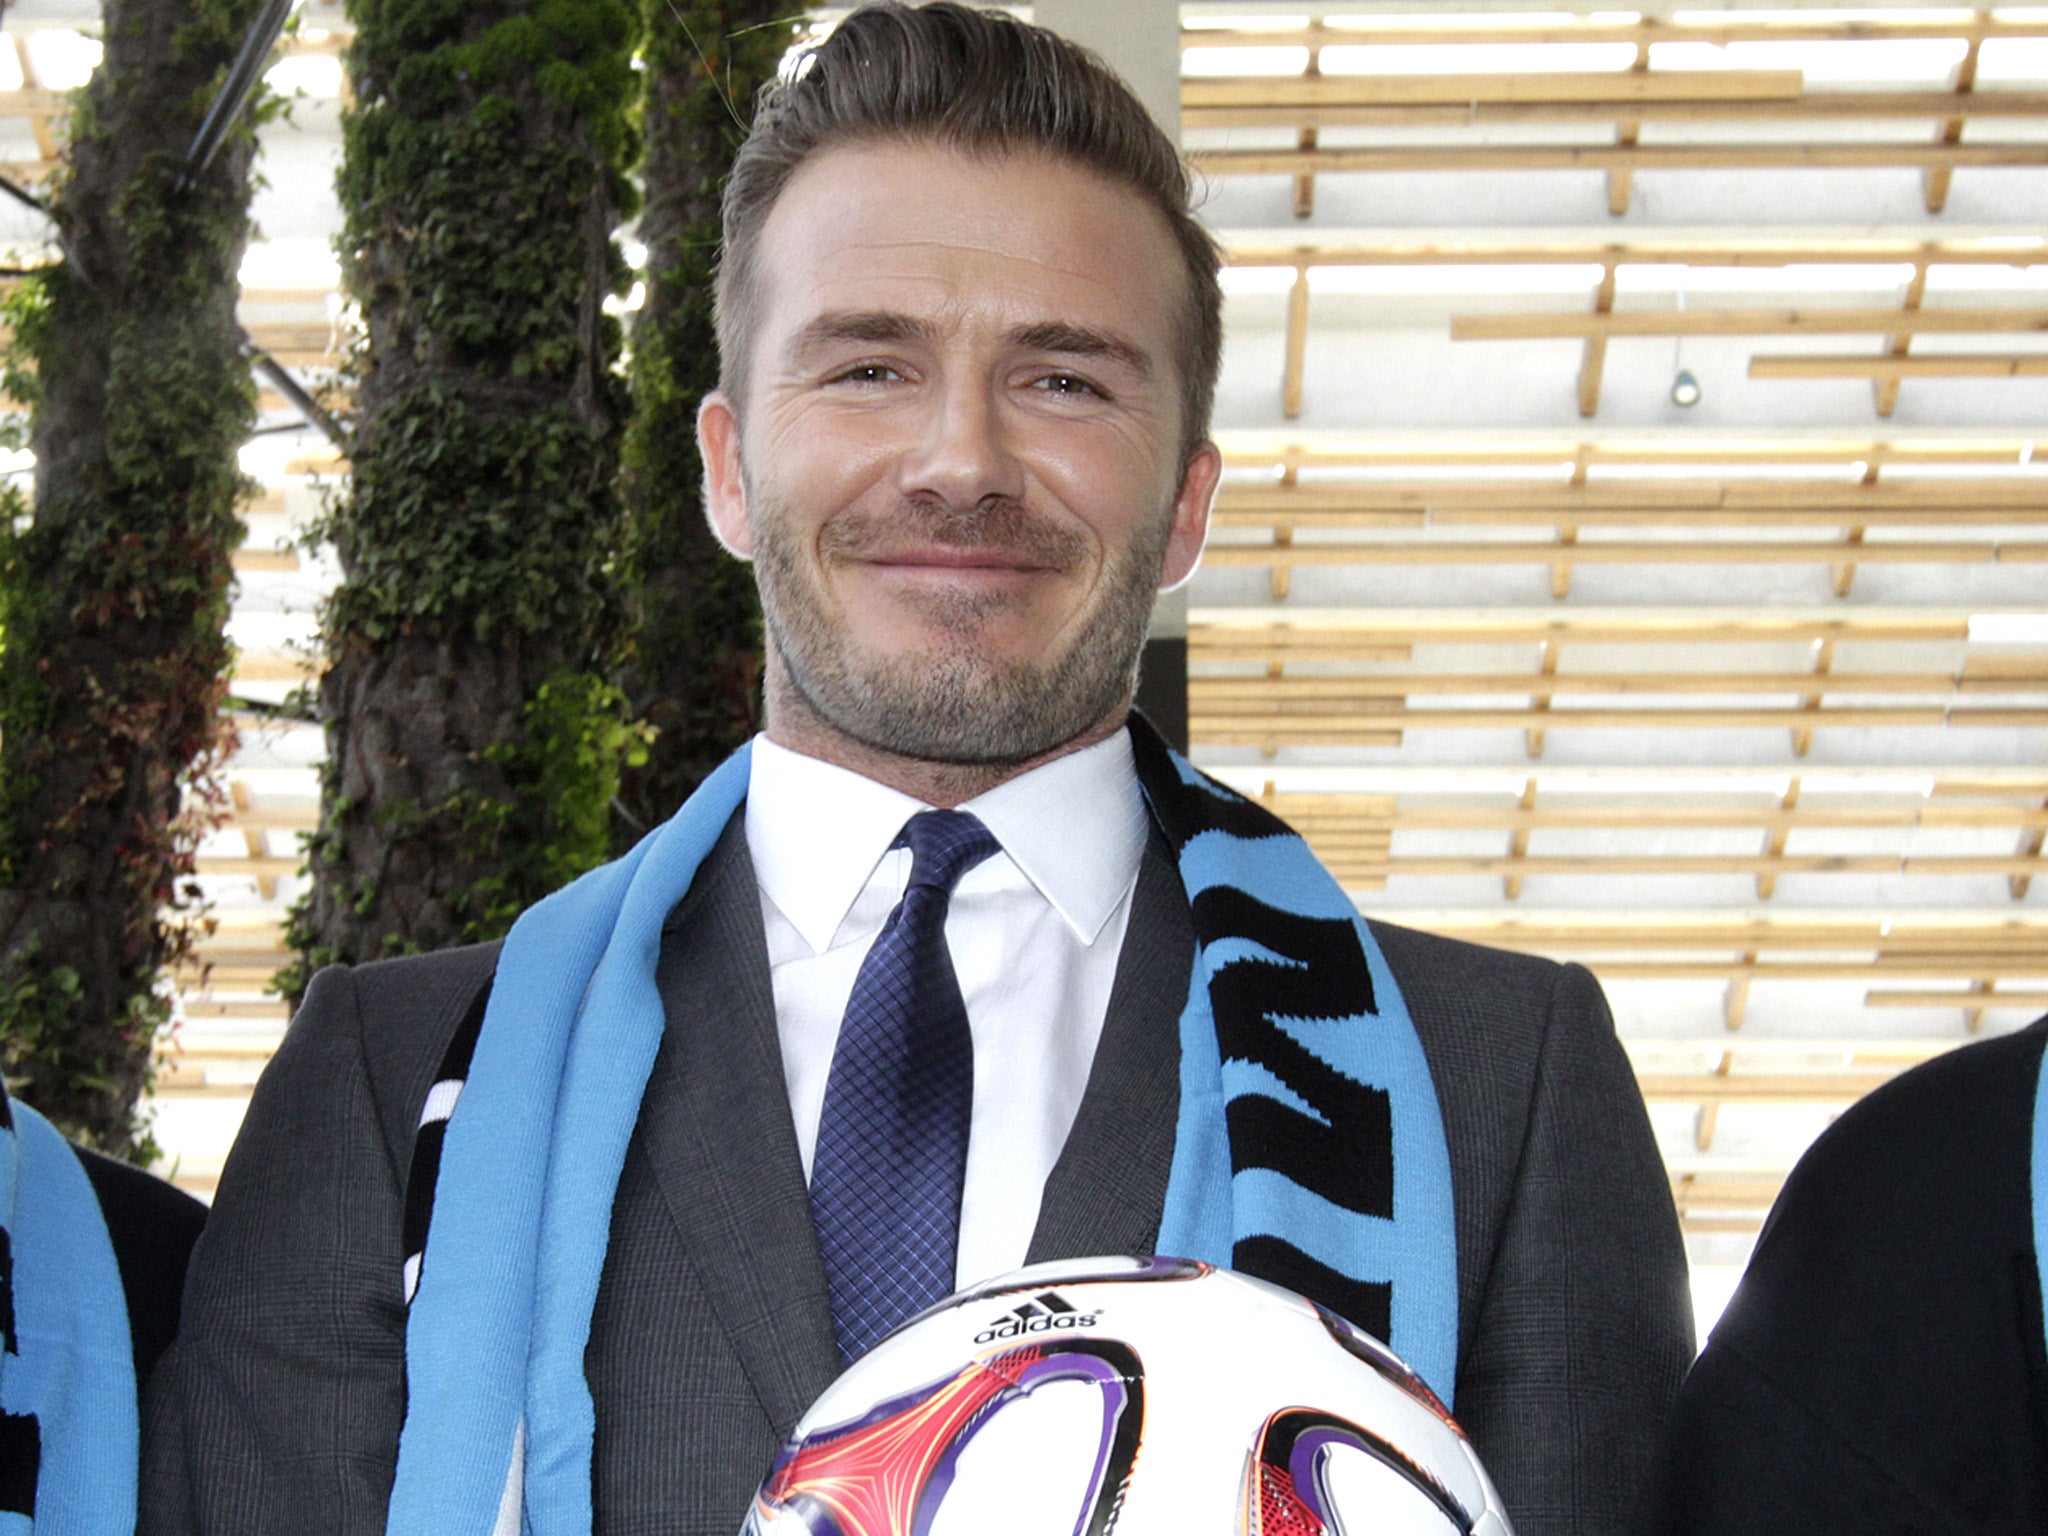 David Beckham is planning to build a stadium in Miami’s port for a new football team he will own